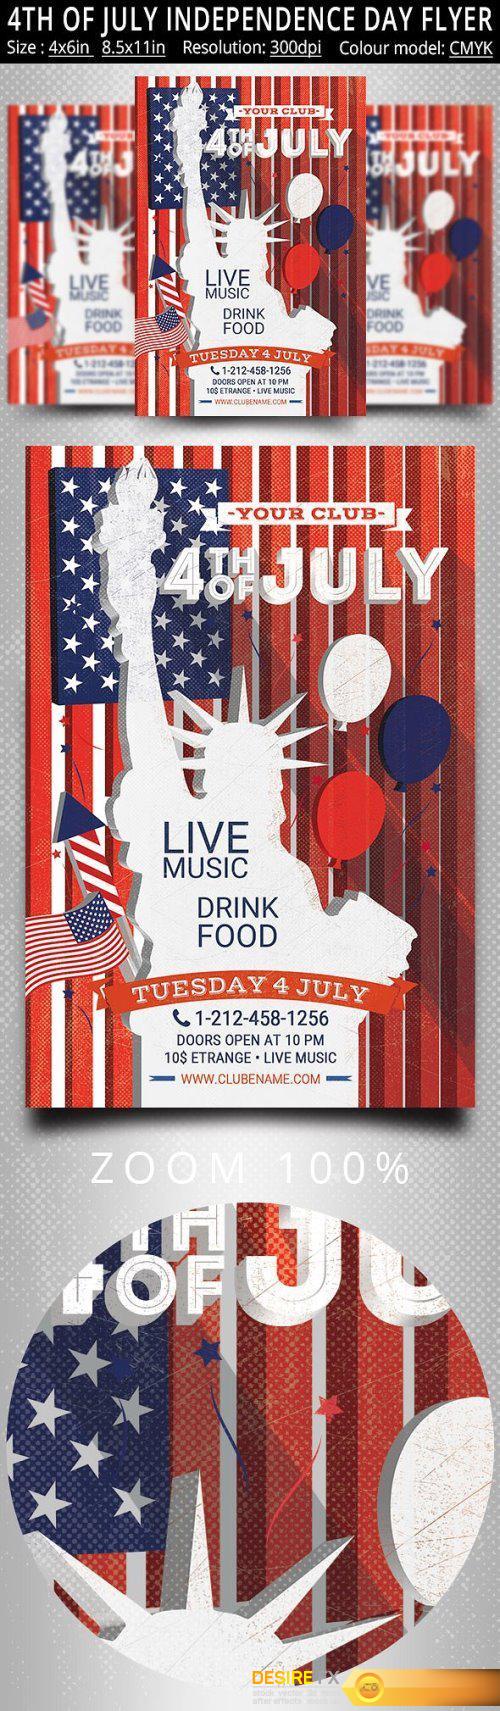 CM - 4th of July Independence Day Flyer 1580595